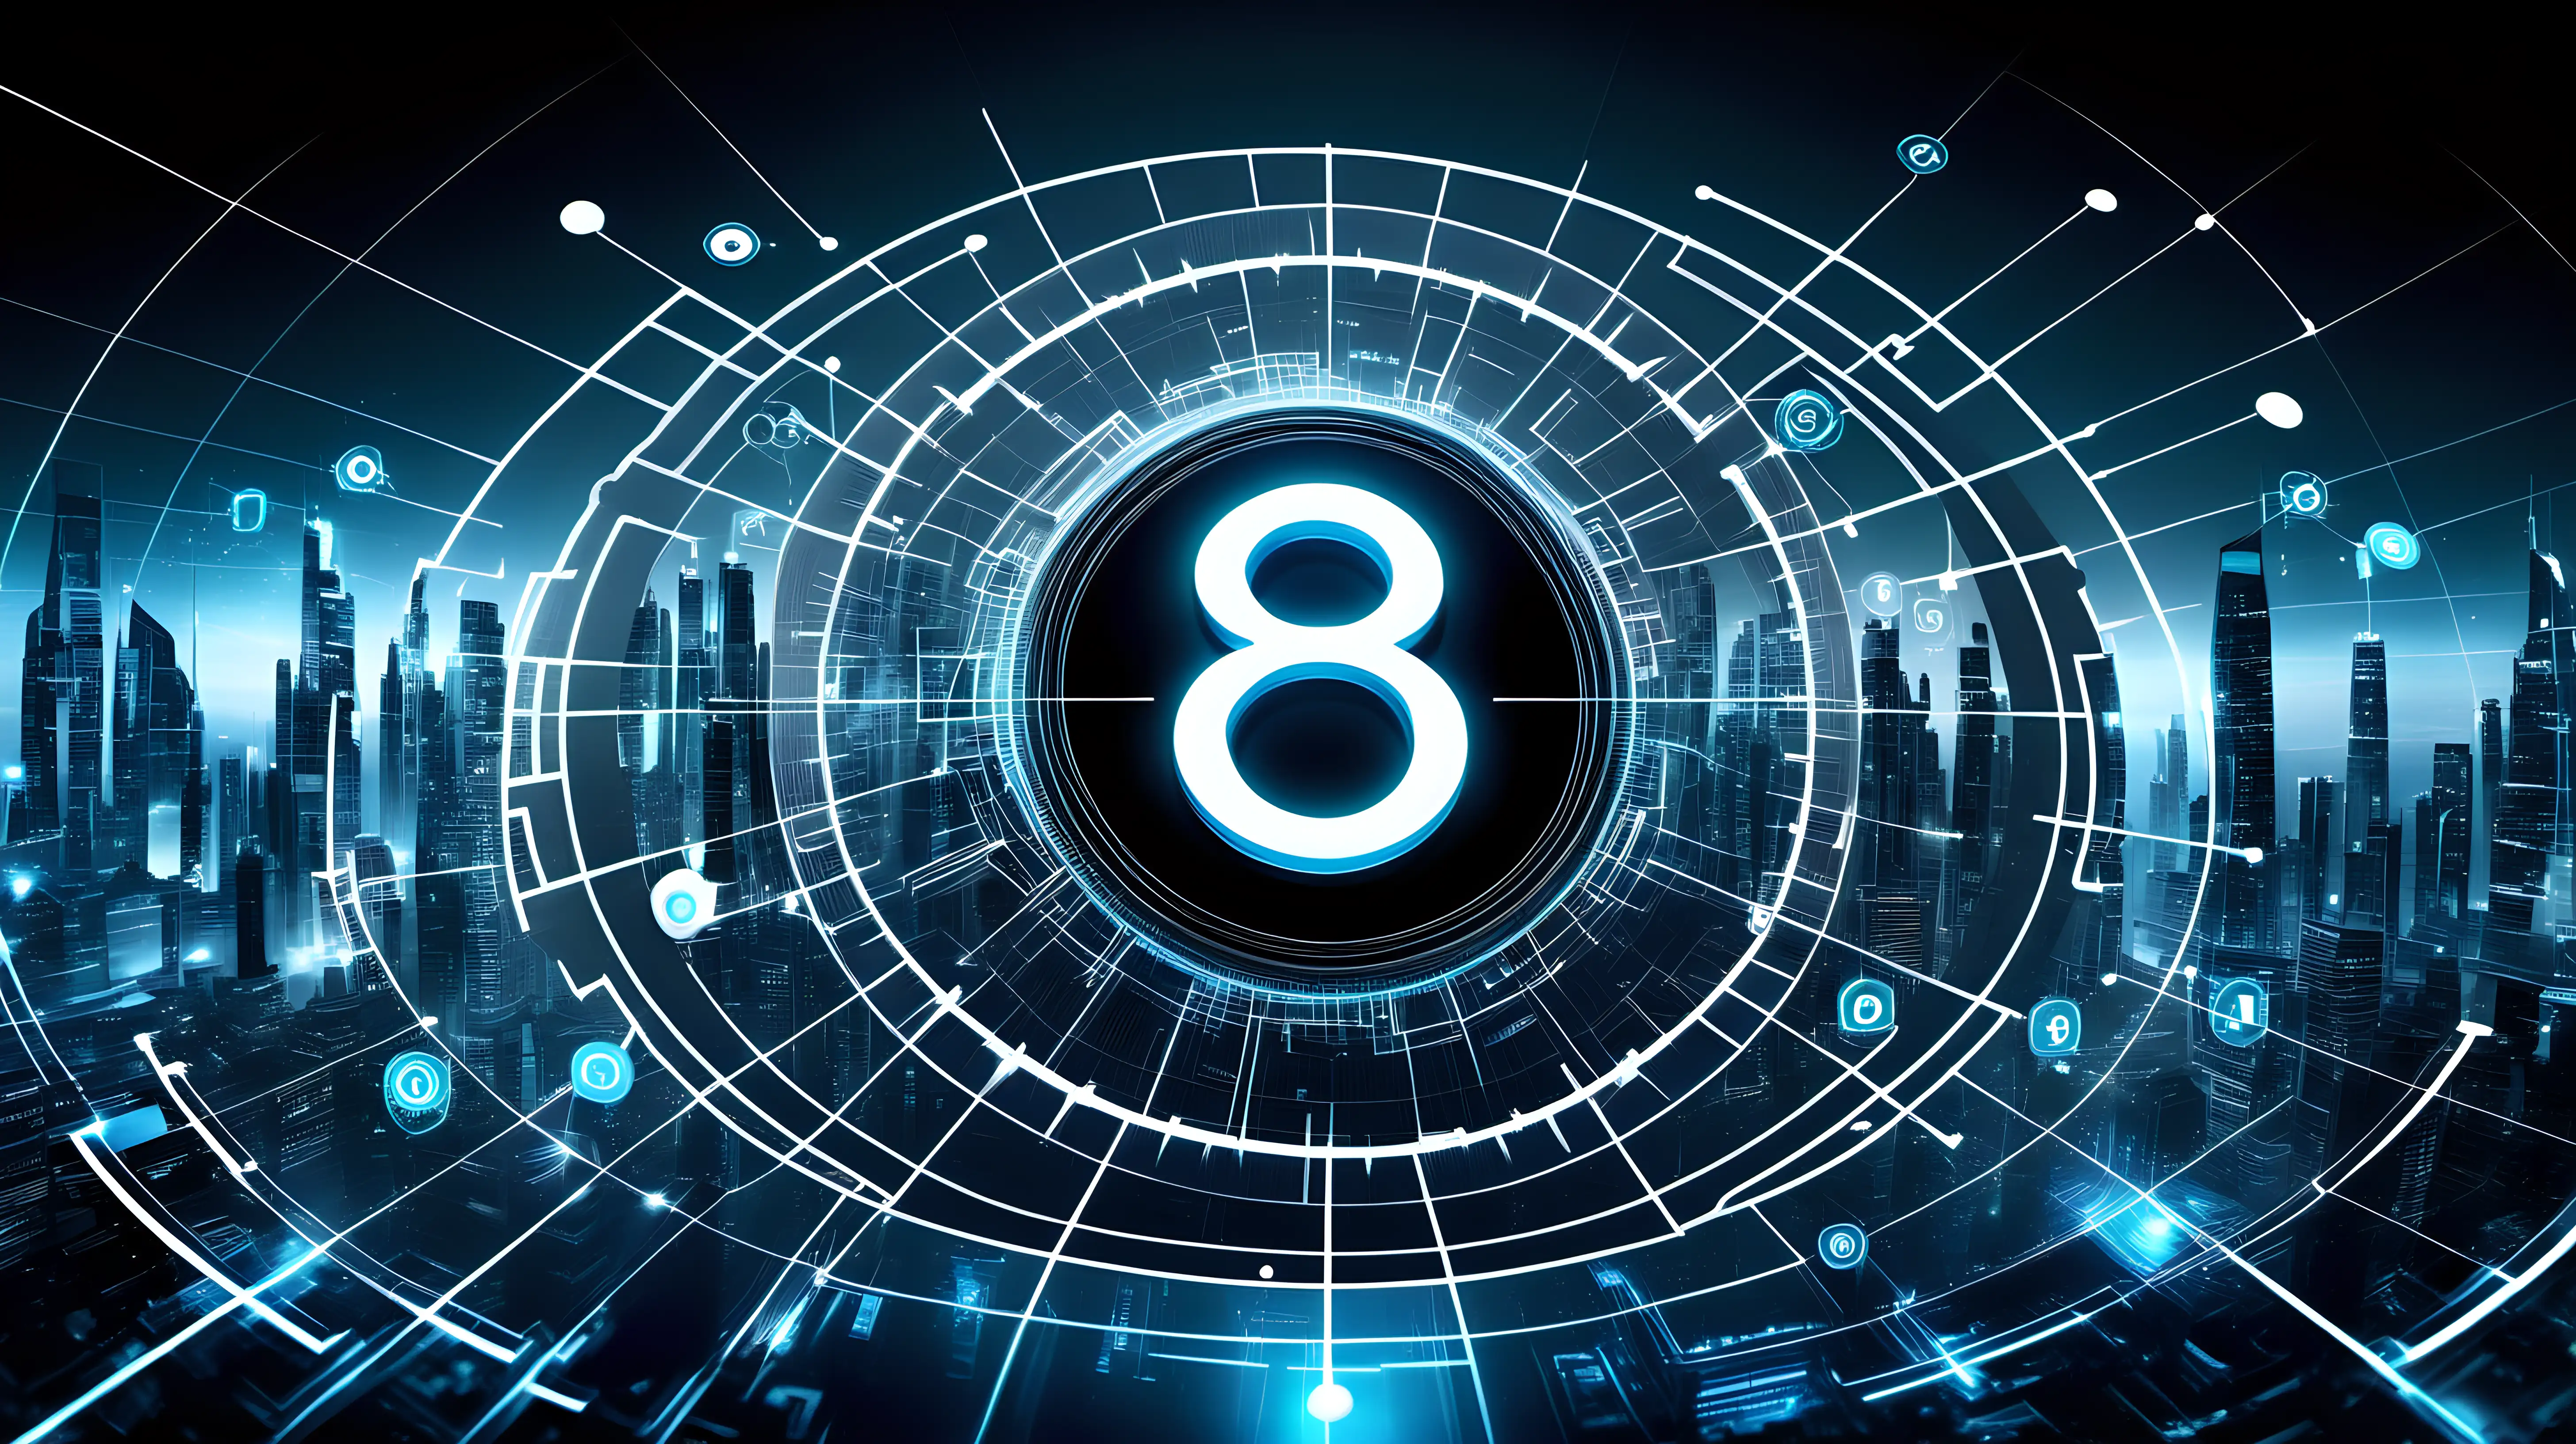 A futuristic and awe-inspiring image capturing the essence of 8G technology, with the central "8G" symbol against a backdrop of advanced digital interfaces and interconnected nodes.